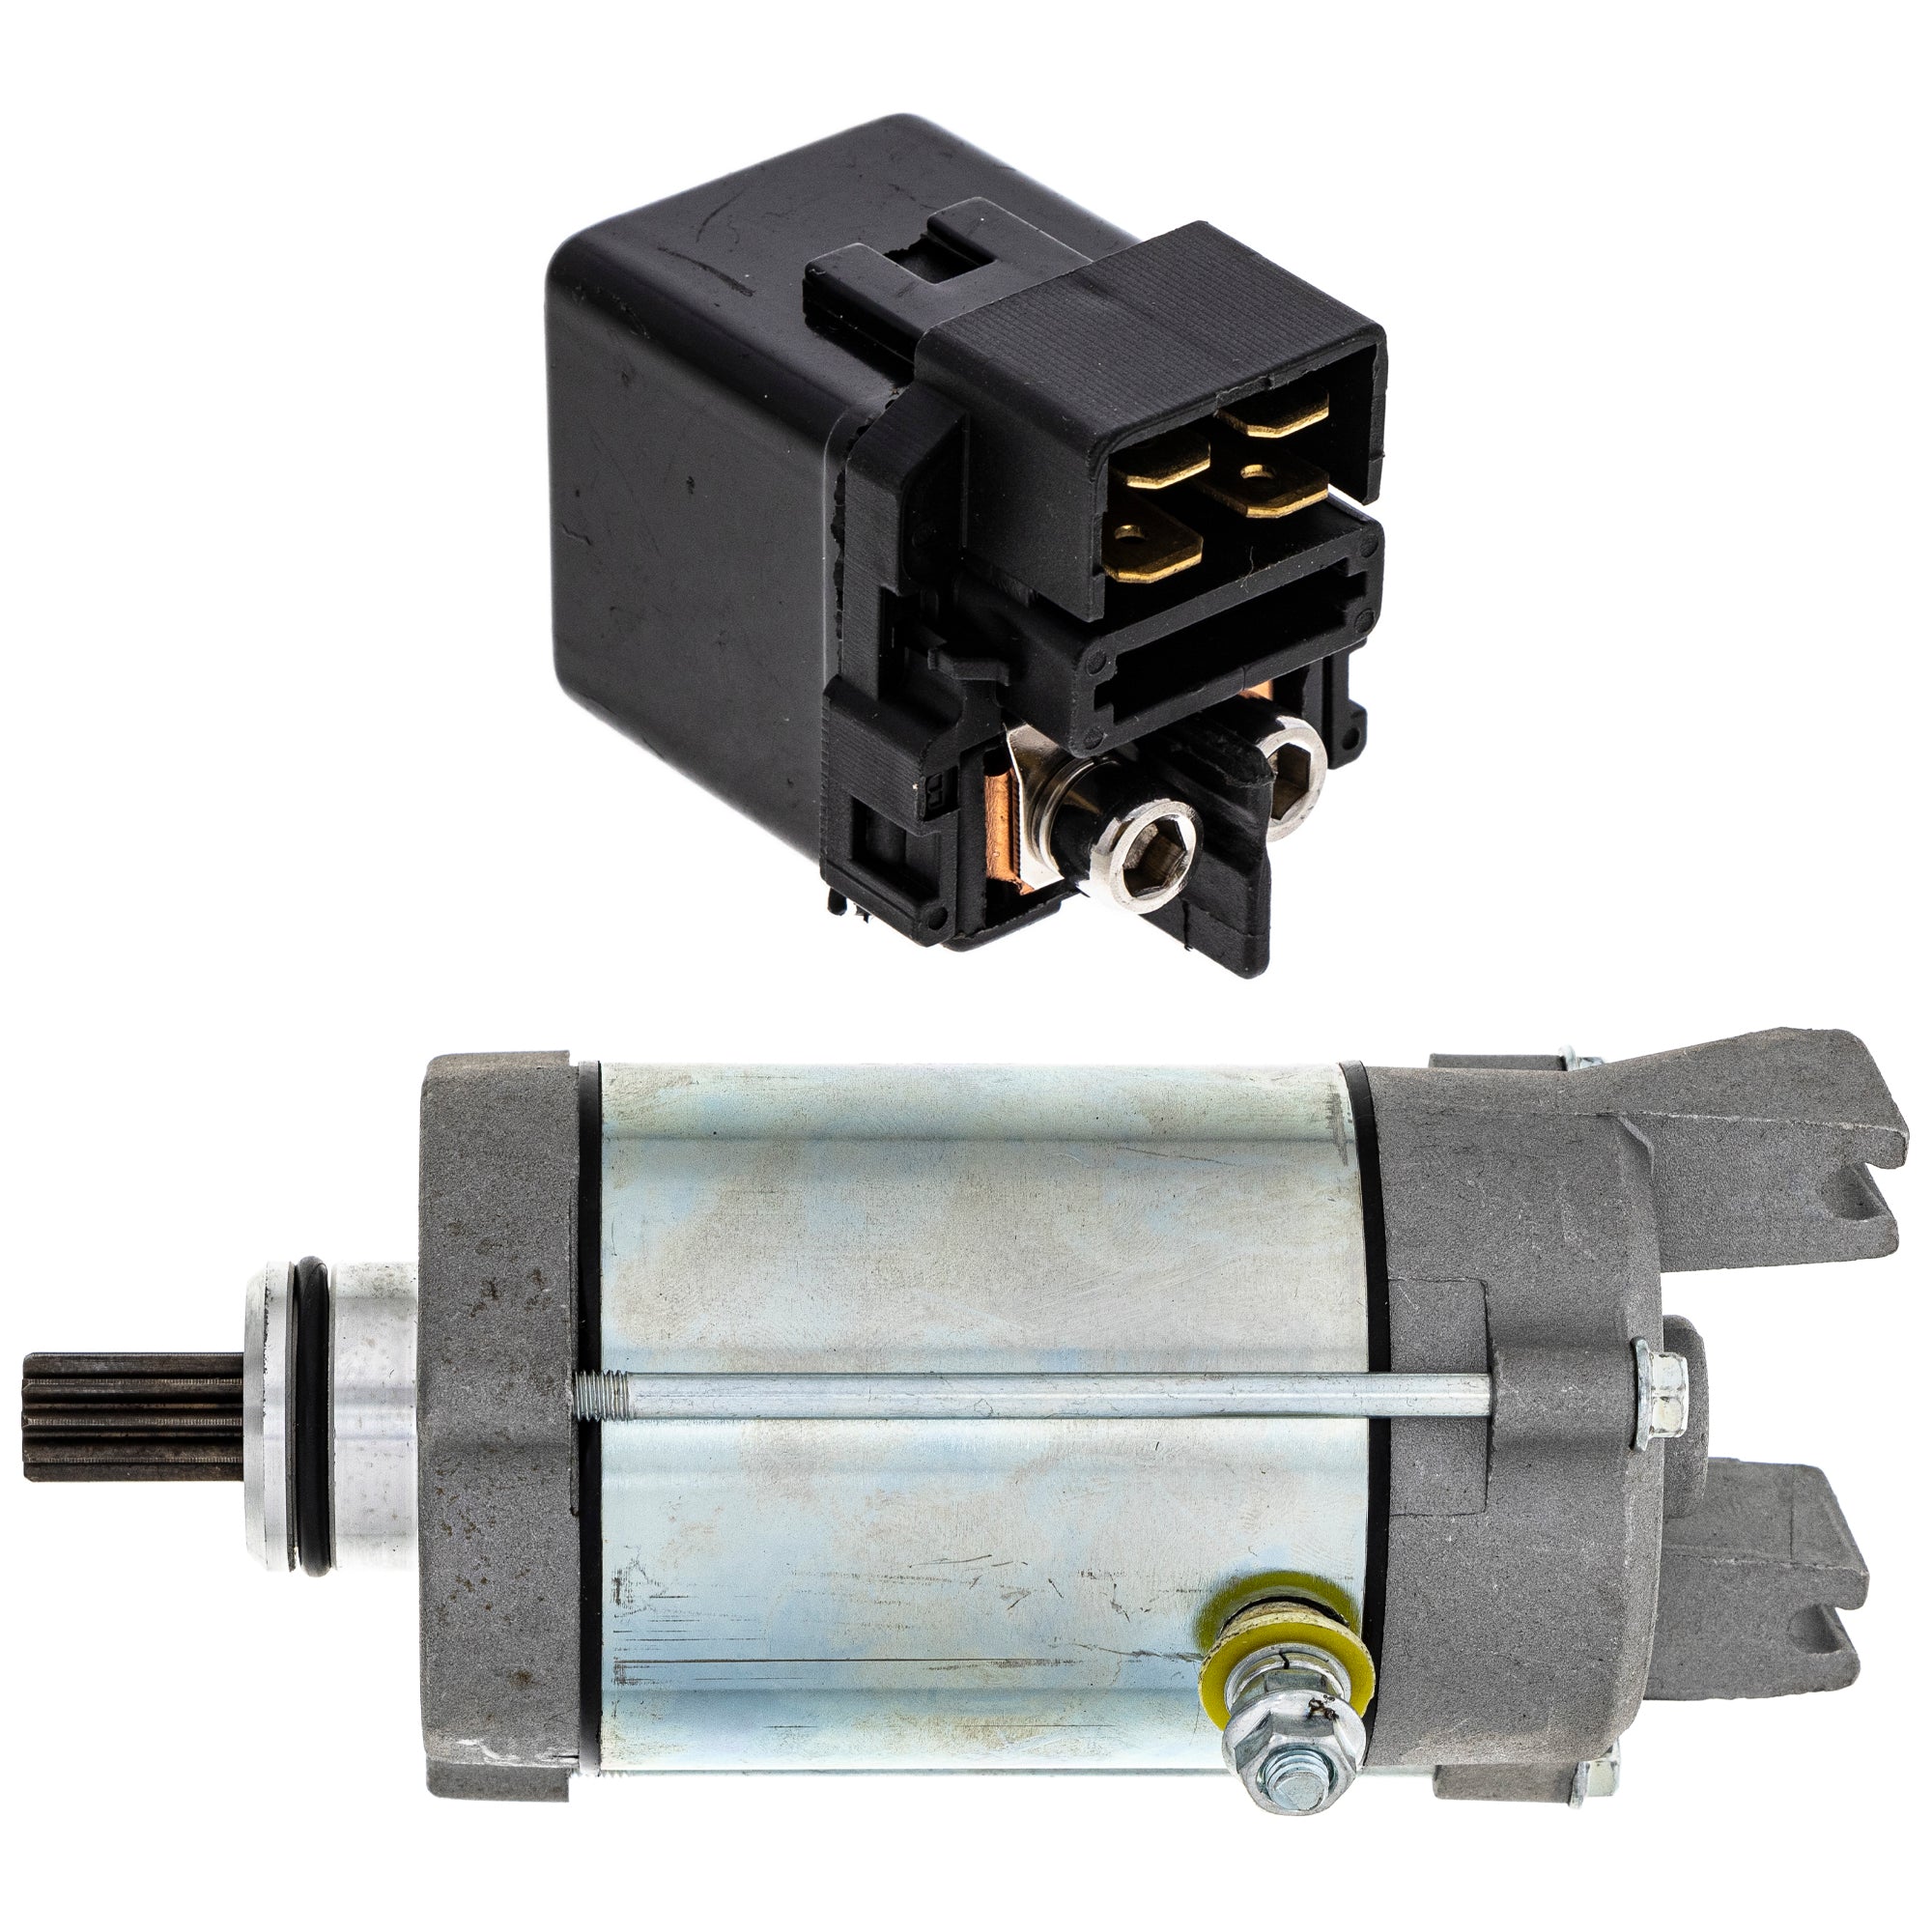 Starter Motor & Solenoid Kit for zOTHER Pacific NICHE MK1007665